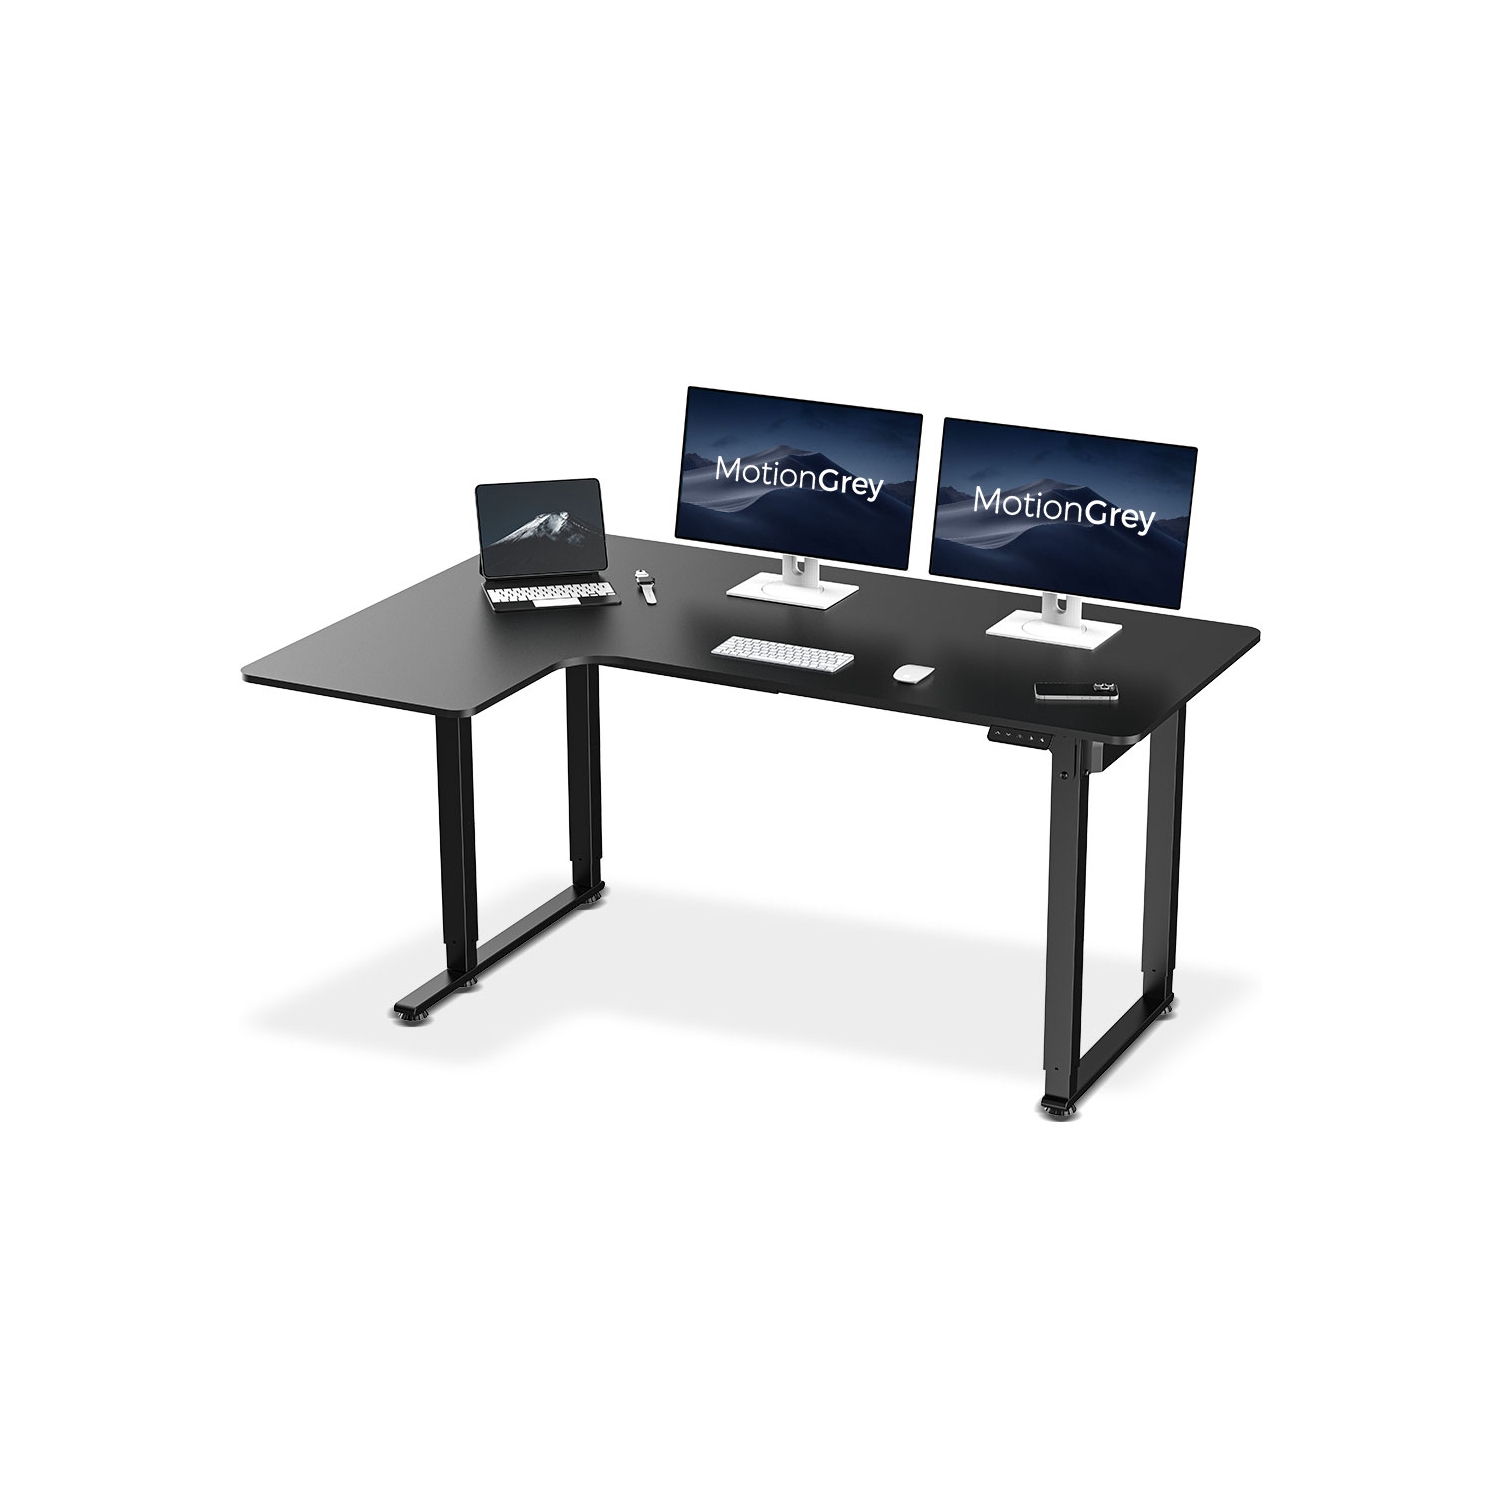 MotionGrey - Electric Height Adjustable Standing Desk, L Shaped Standing Desk, Corner Desk, Adjustable Computer Sit Stand Desk Stand - Black L Shape Desk (63 Inch Table Top)